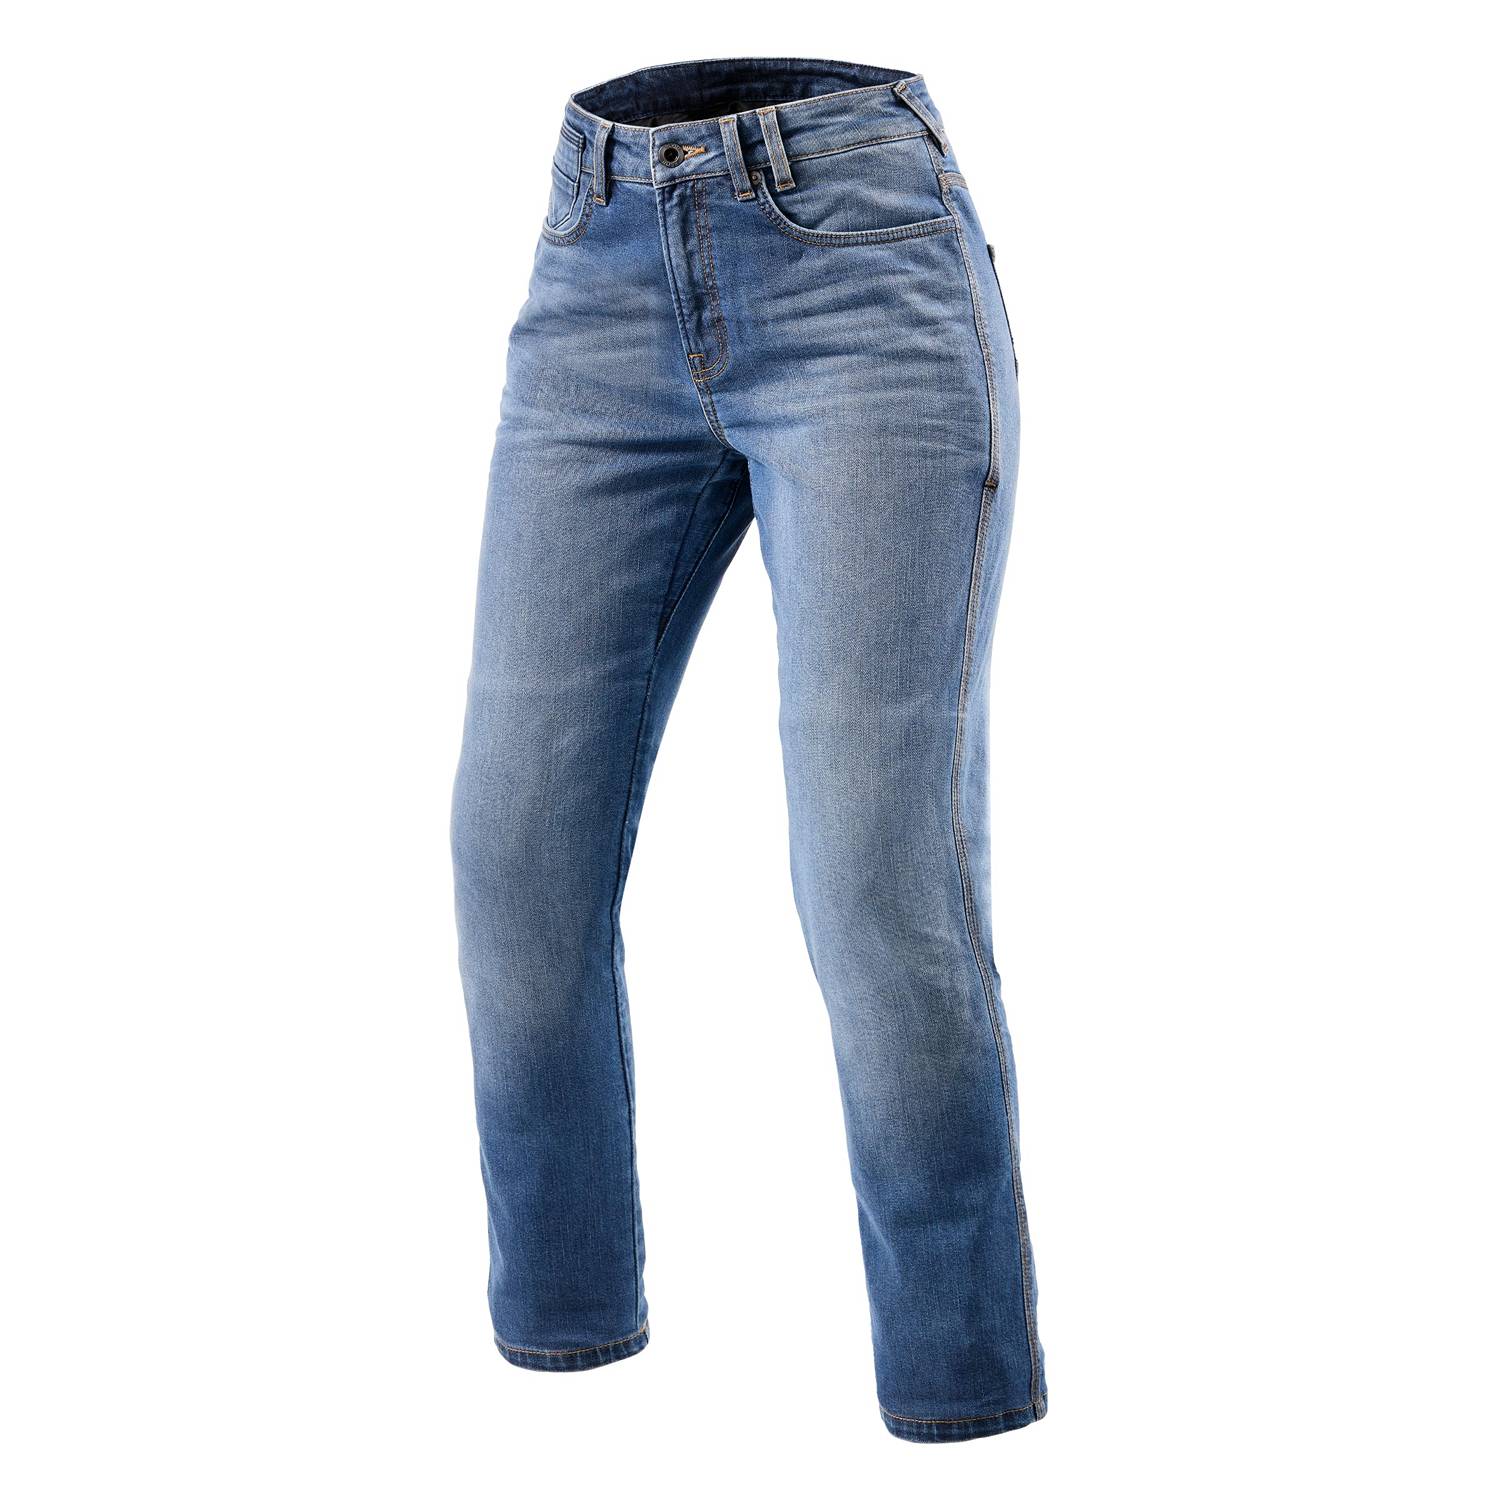 Image of REV'IT! Jeans Victoria 2 Ladies SF Classic Blue Used Motorcycle Jeans Größe L32/W27